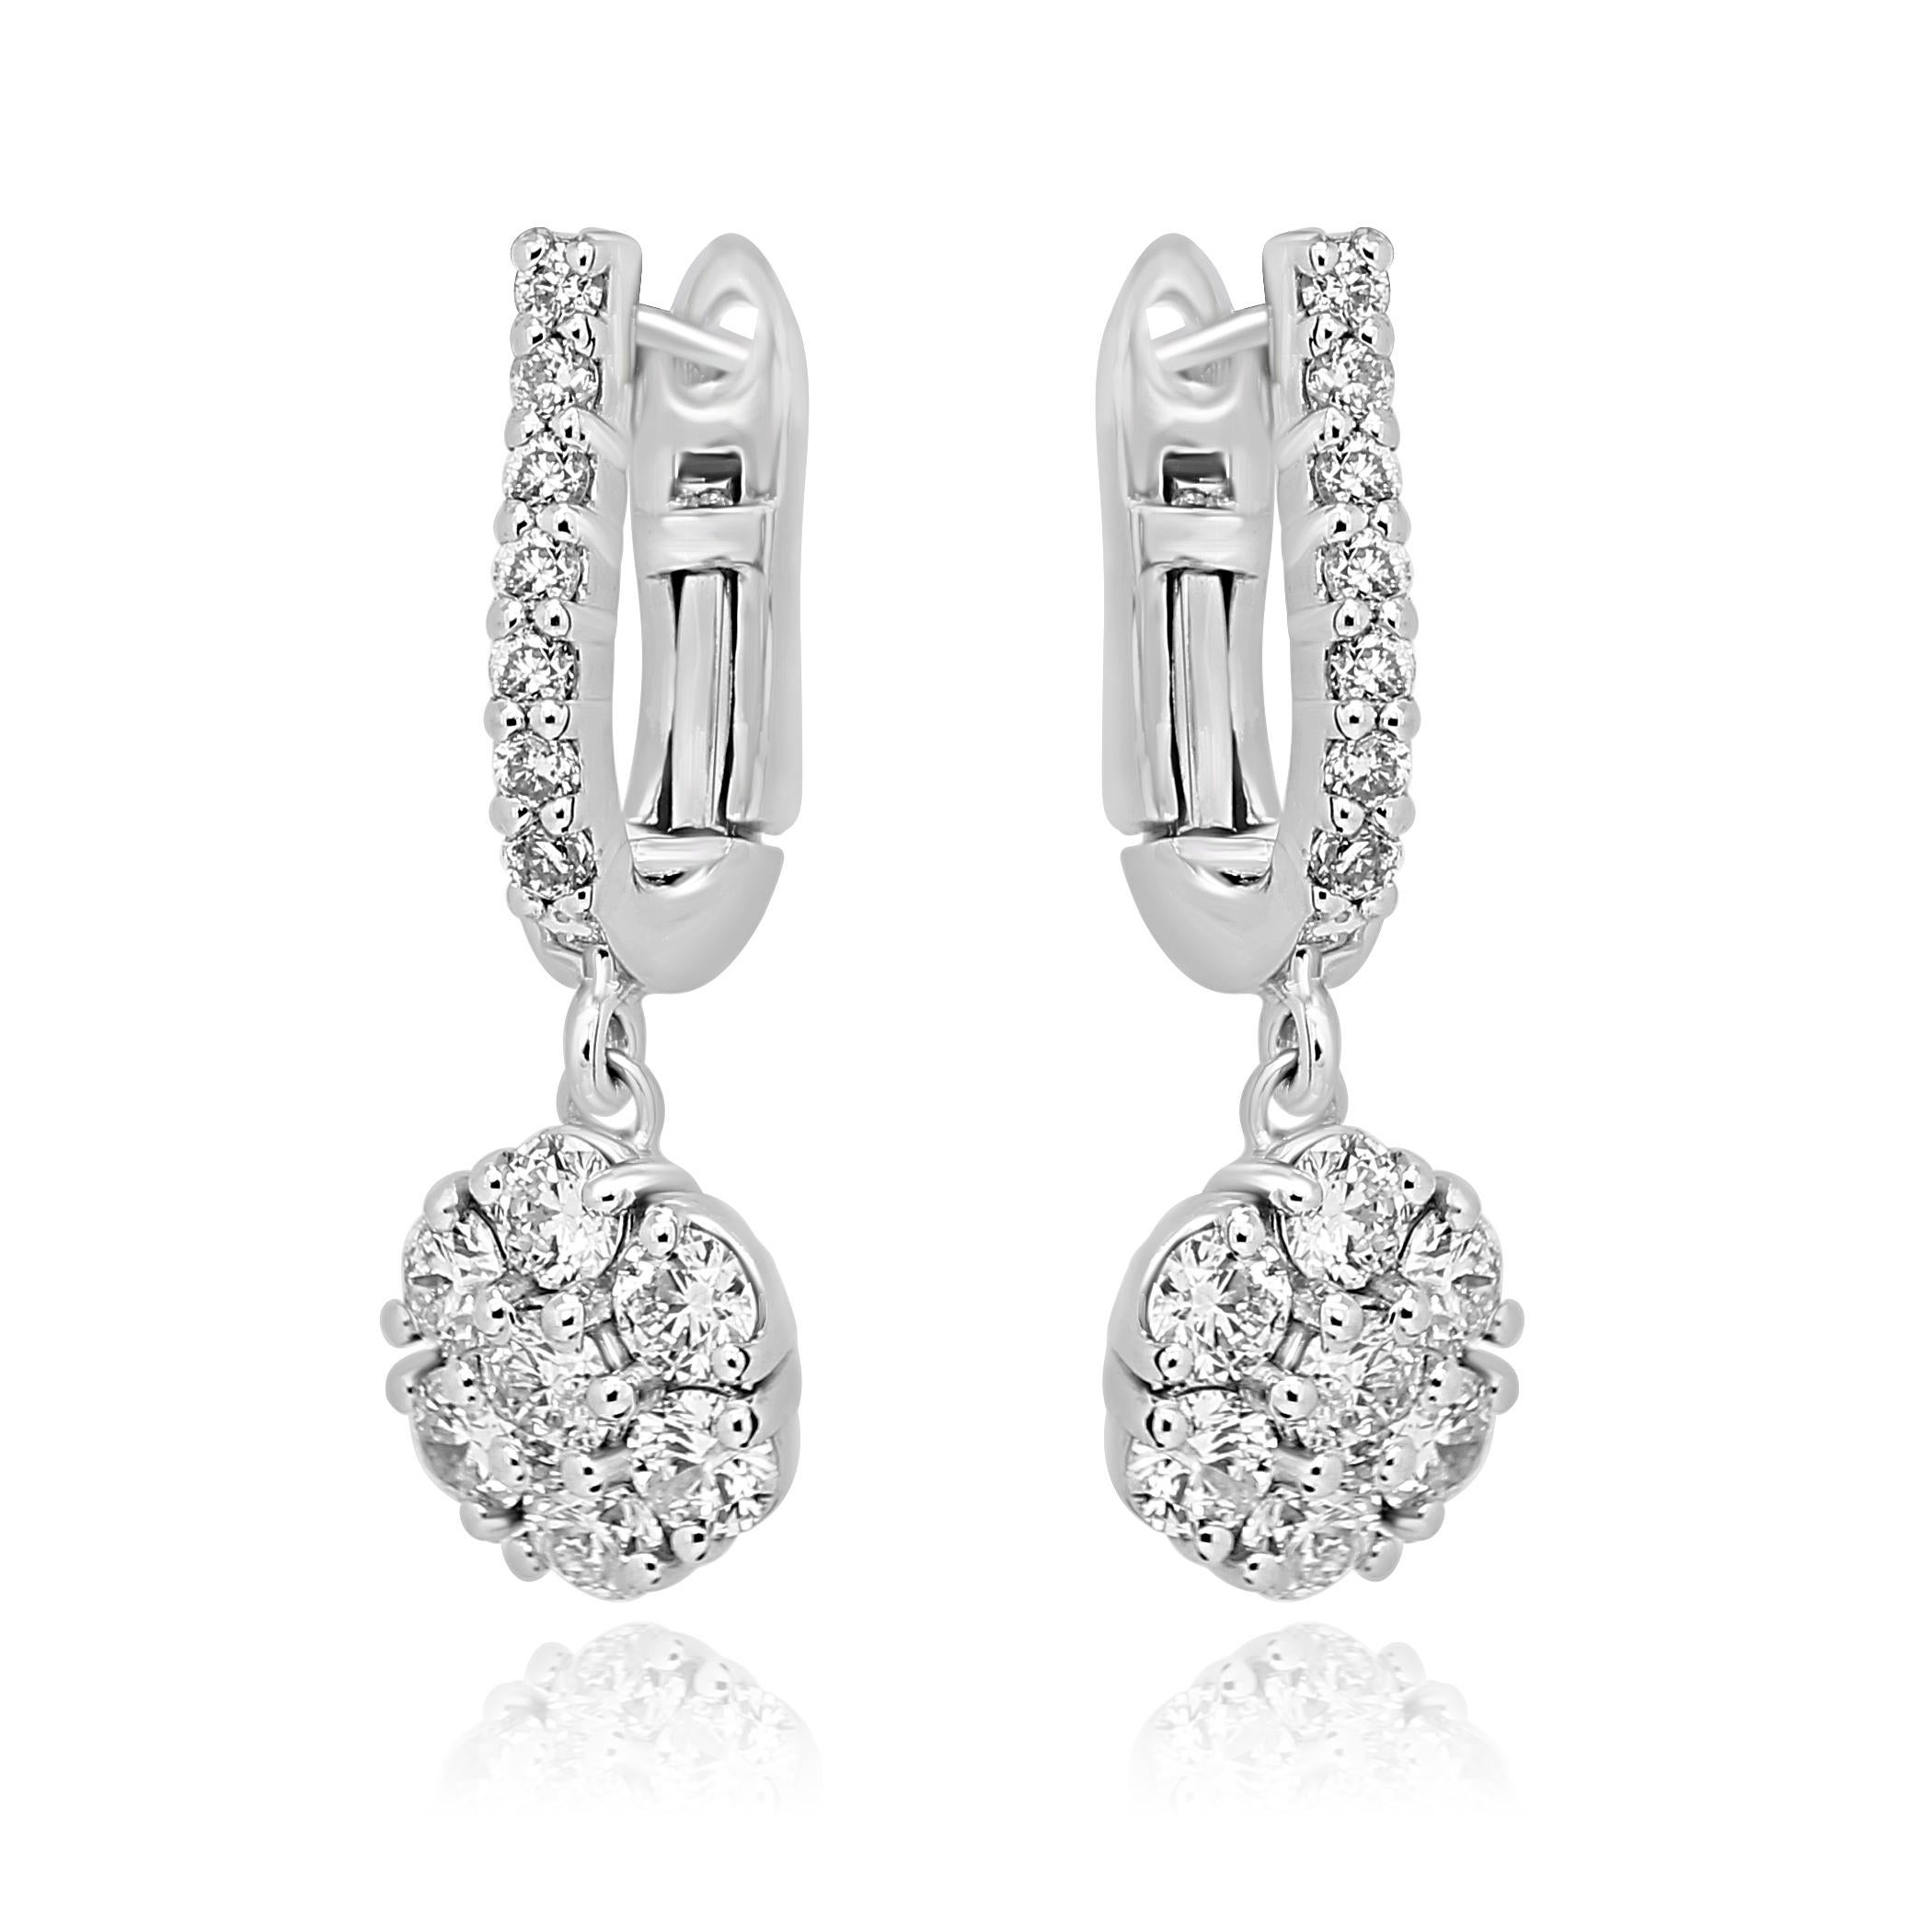 Stunning White Diamond Round 1.23 Carat set in Cluster style making it look like one big Diamond in 14K White Gold Dangle Clip on Earring.

Style available in different price ranges. Prices are based on your selection of 4C's Cut, Color, Carat,